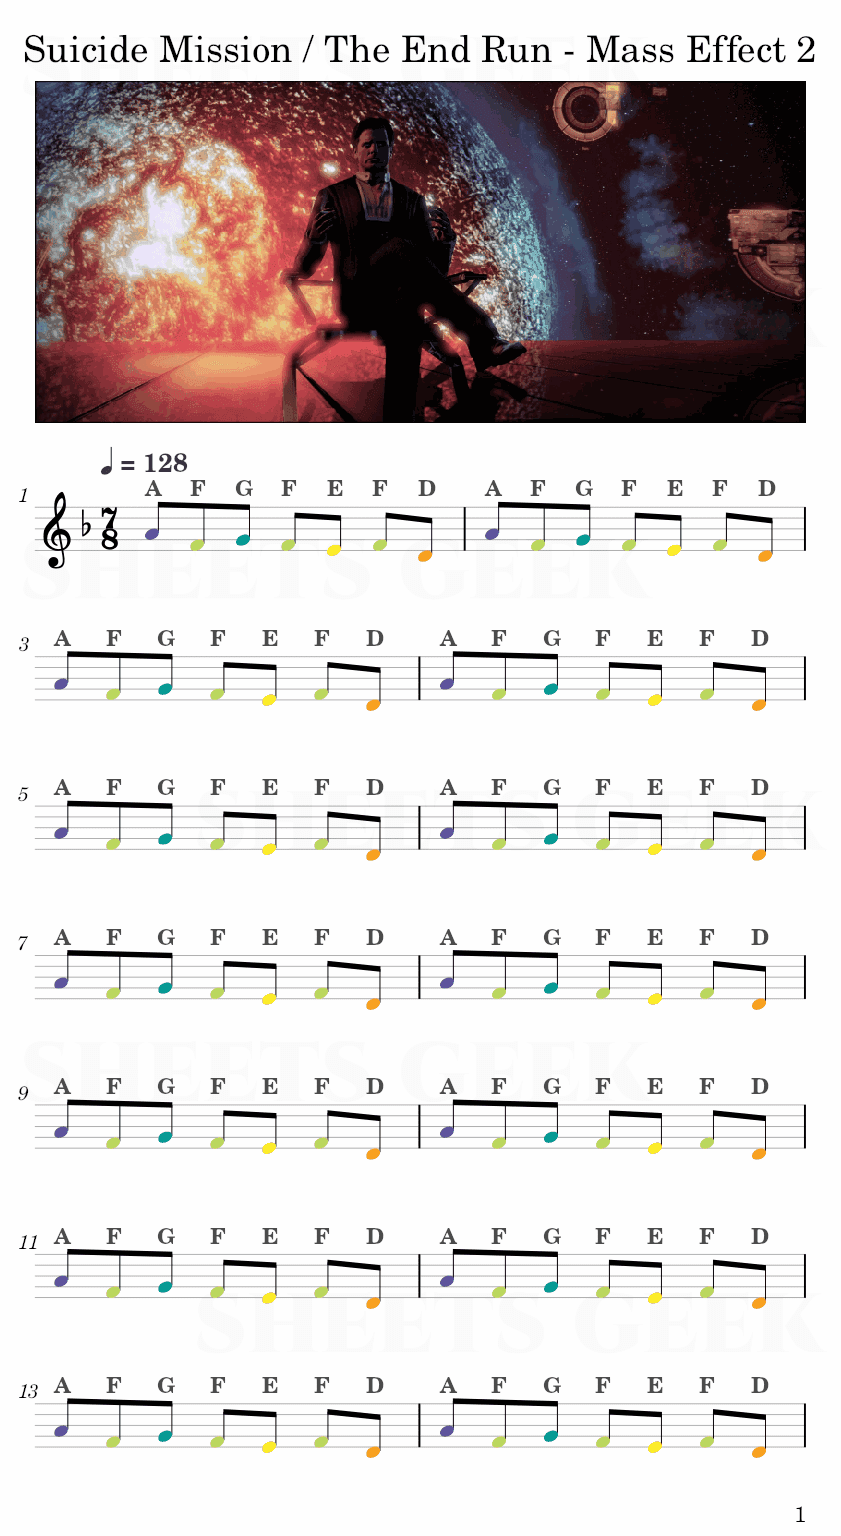 Suicide Mission / The End Run - Jack Wall (Mass Effect 2) Easy Sheet Music Free for piano, keyboard, flute, violin, sax, cello page 1